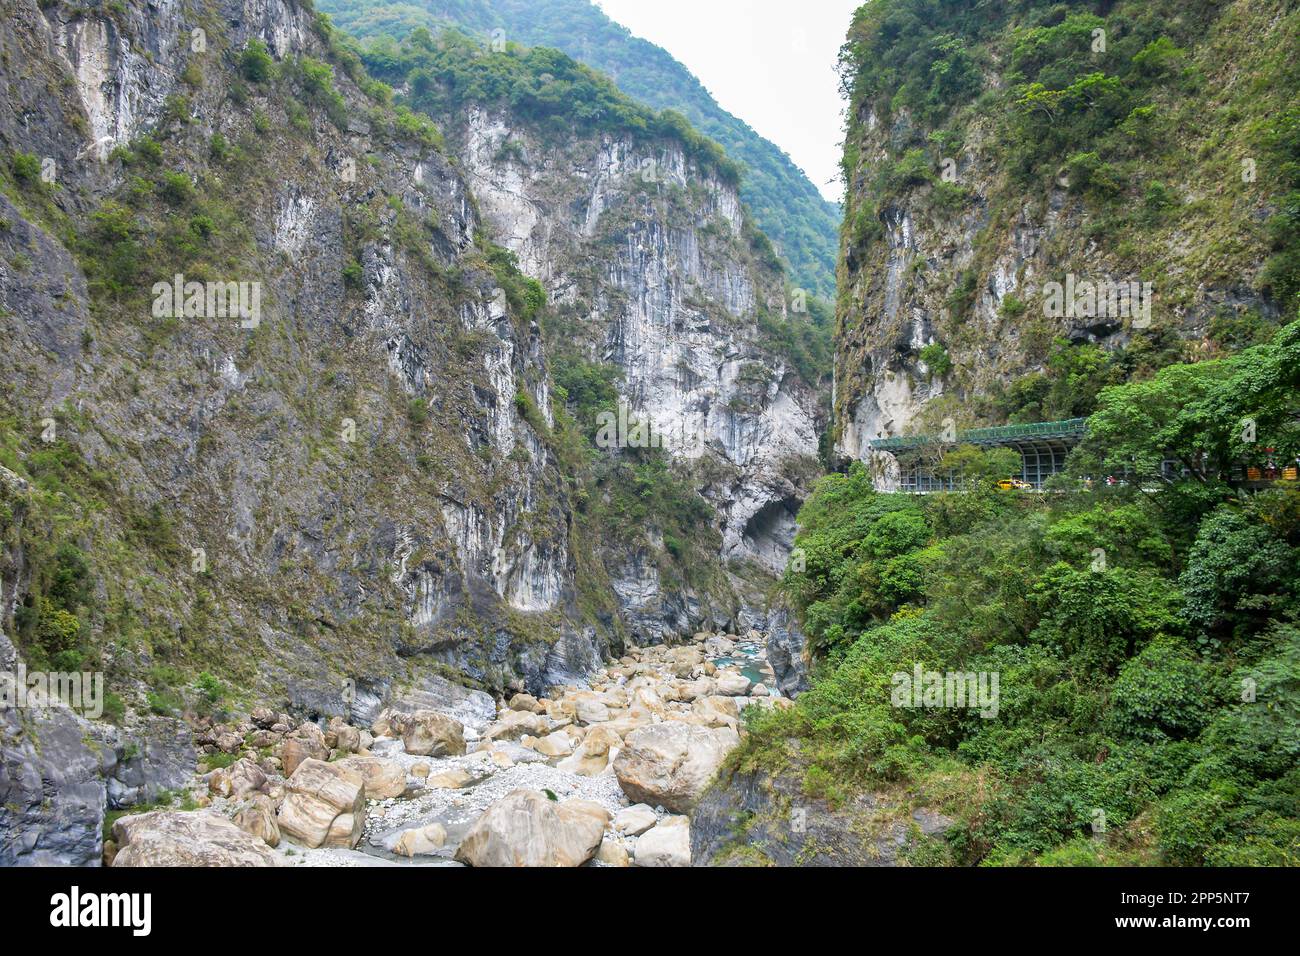 Scenic view of Taroko National Park with high mountain cliff face in Taroko National Park, Xiulin Township, Hualien, Taiwan Stock Photo